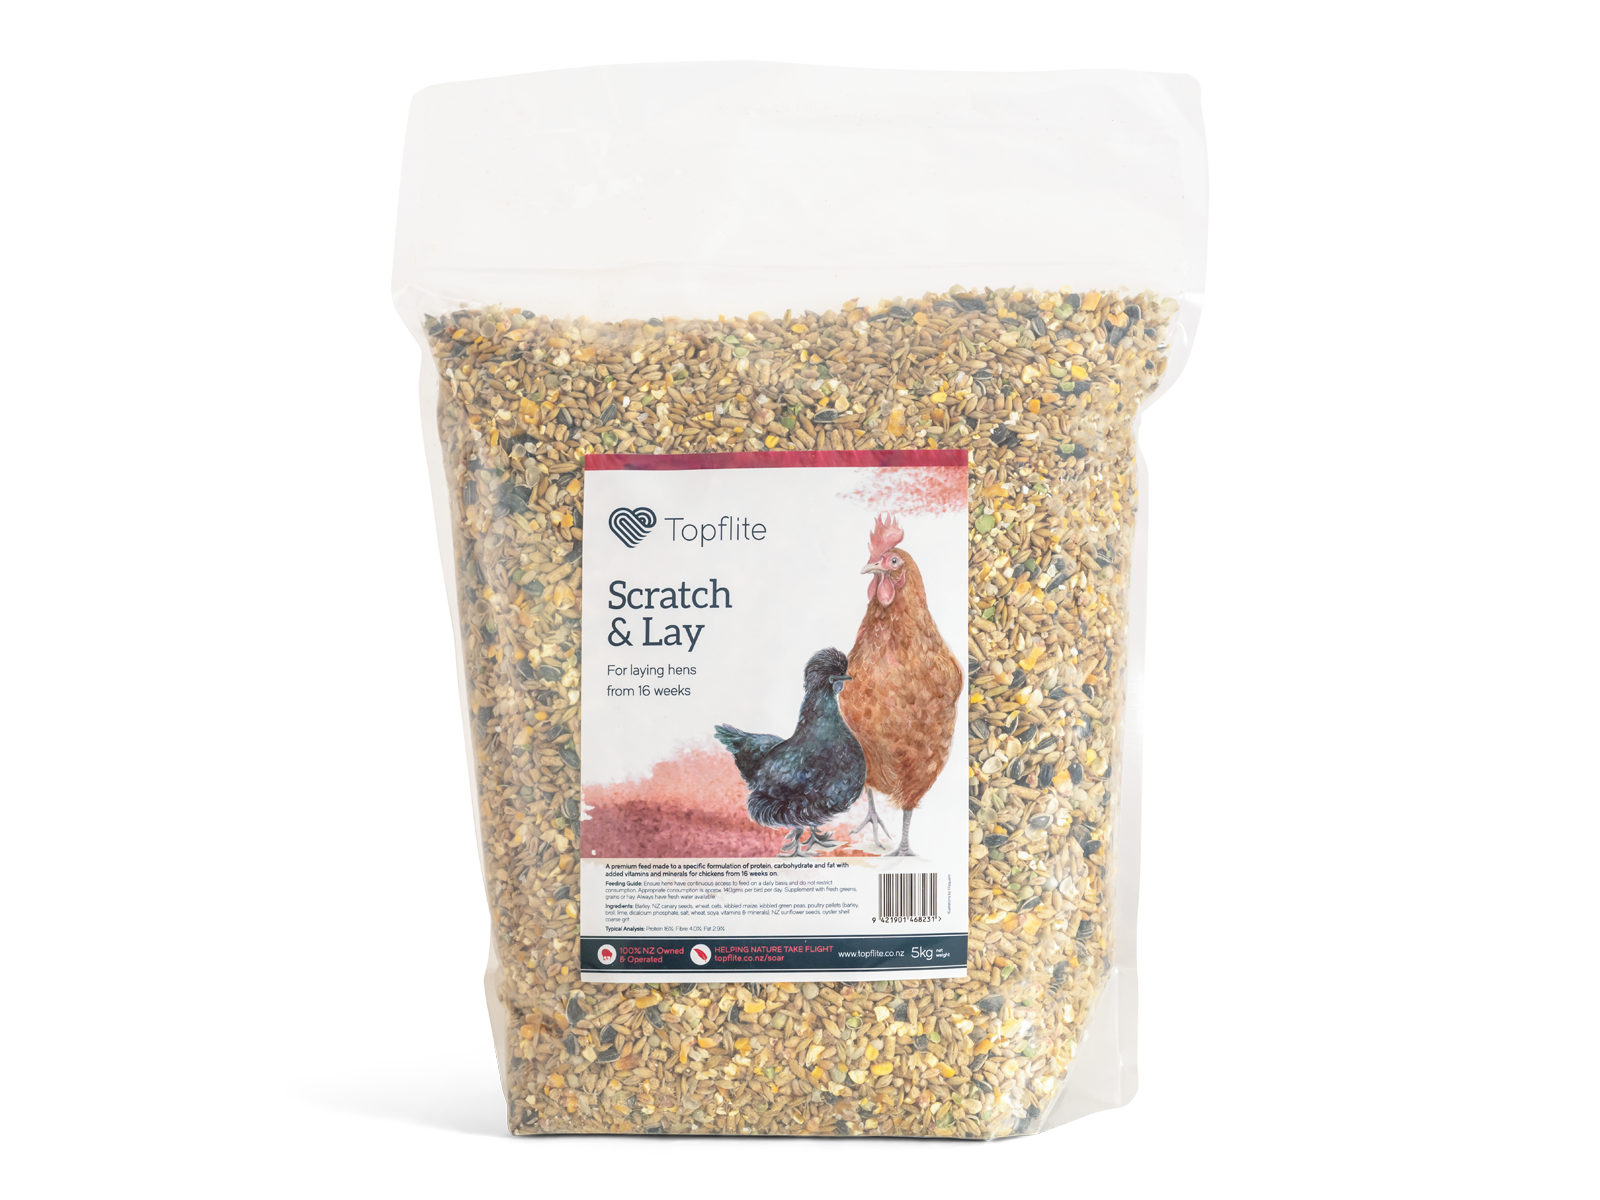 Topflite Poultry Scratch & Lay